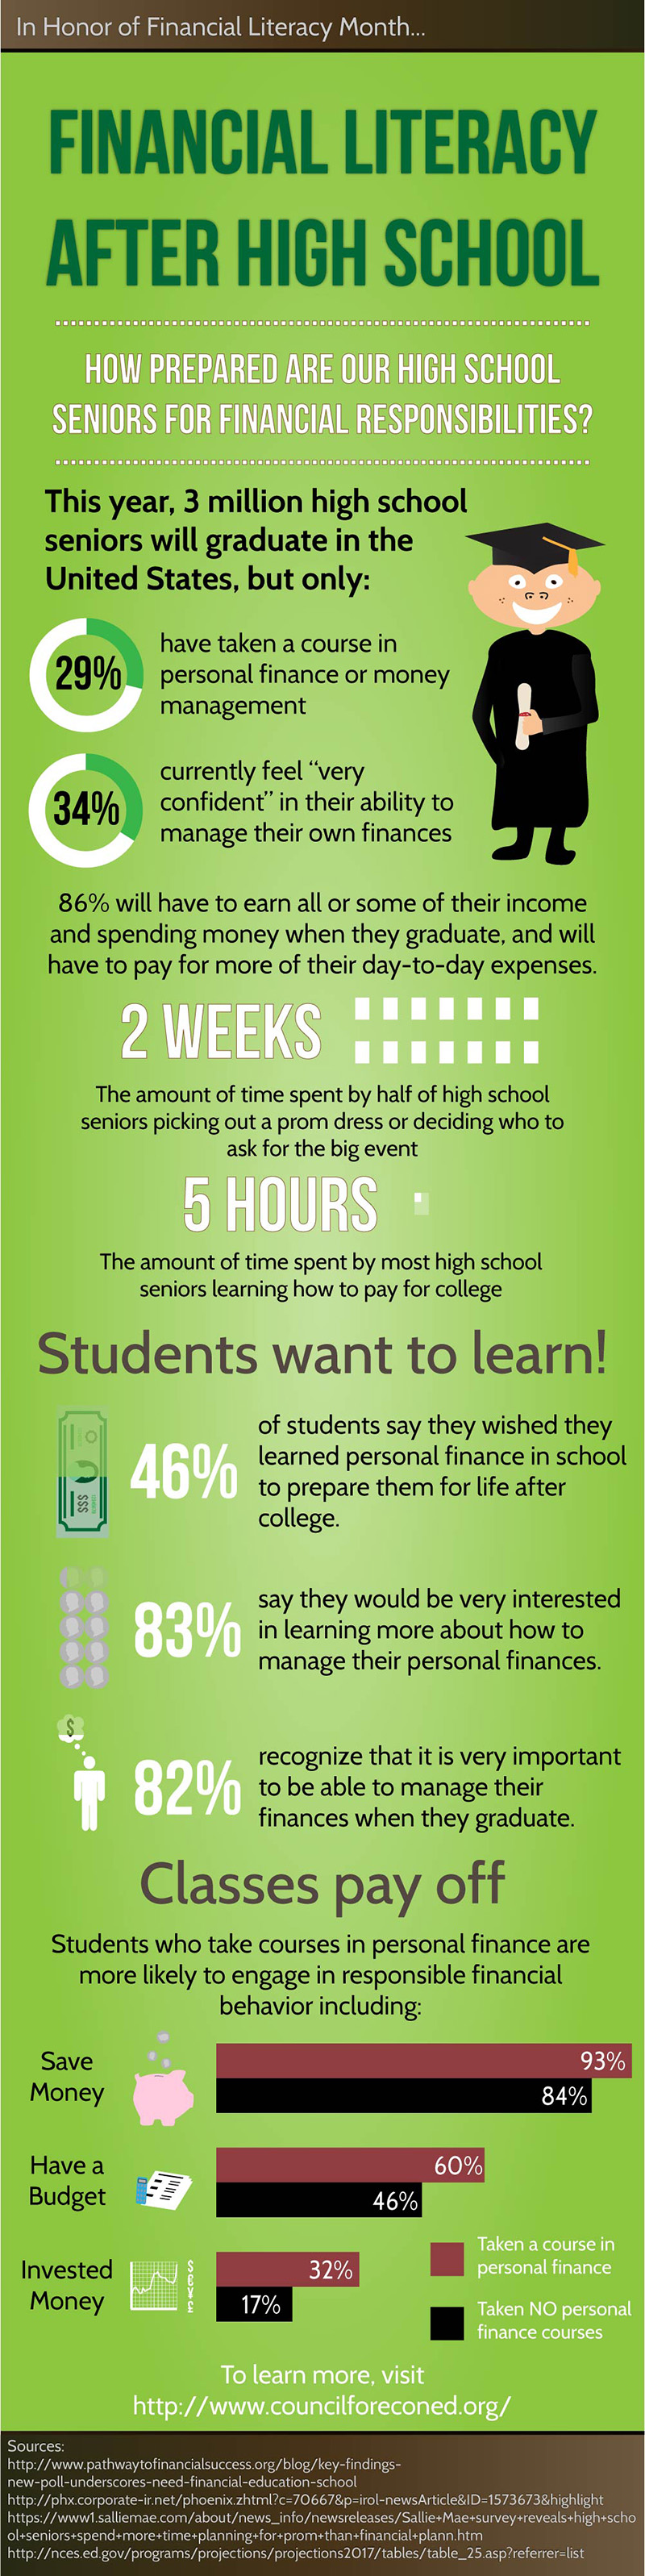 infographic on financial literacy in the US